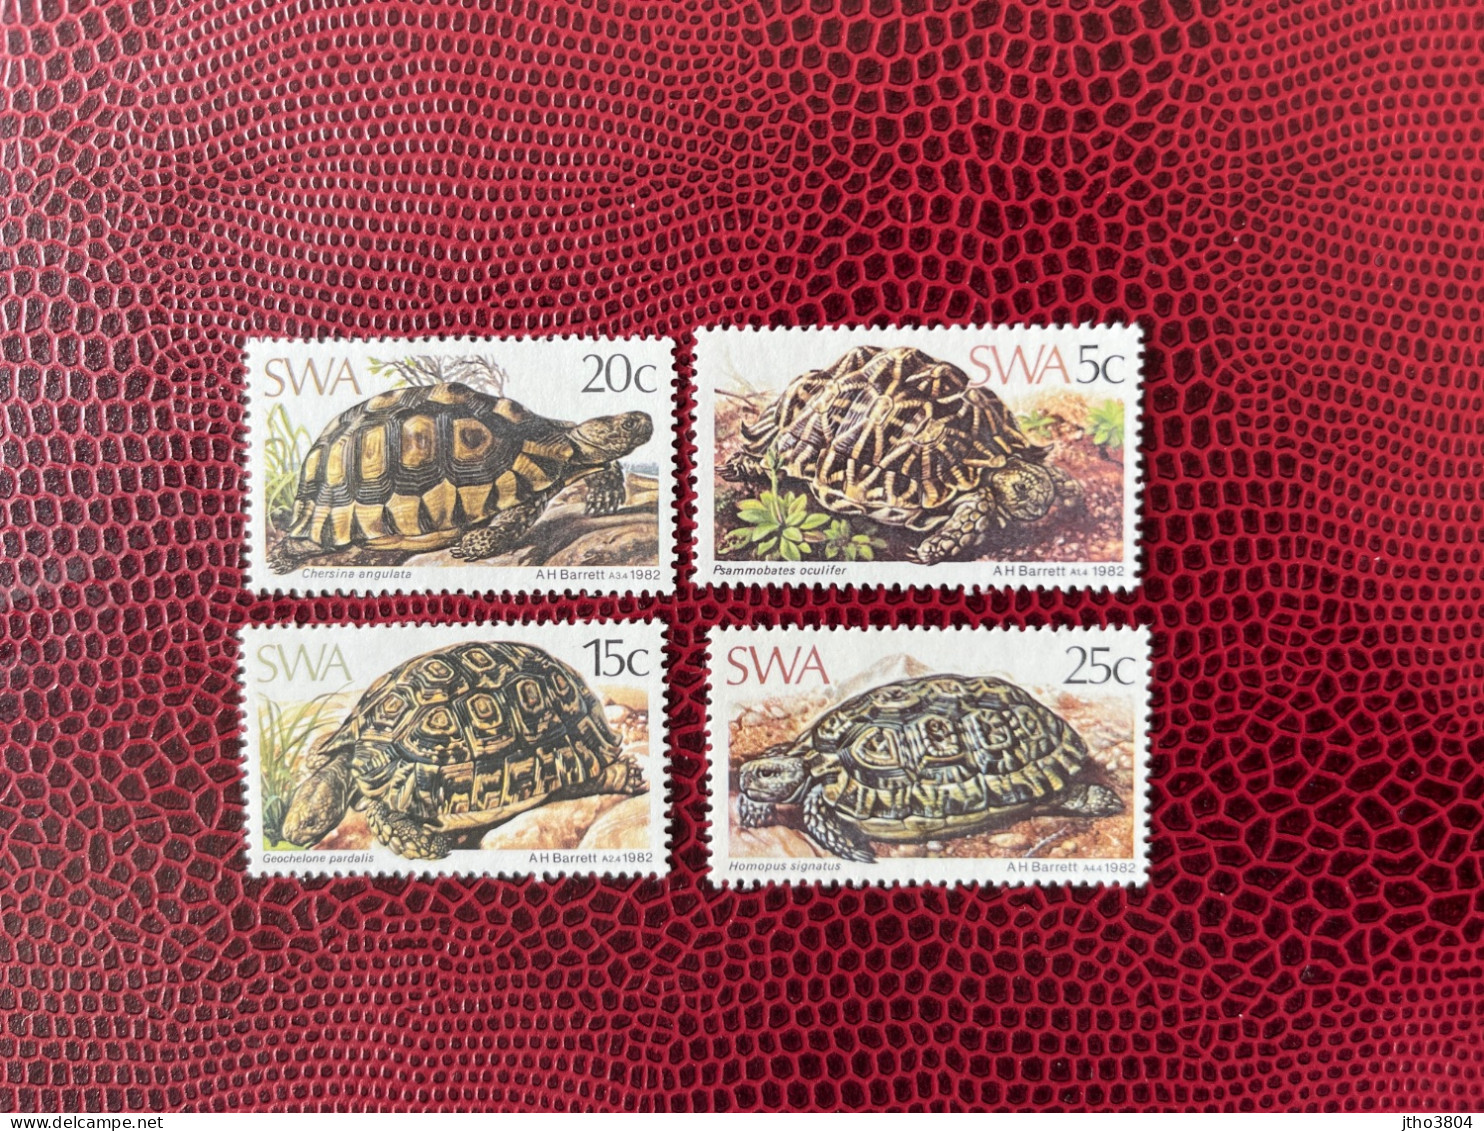 SWA 1982 SUD OUEST AFRICAIN 4v Neuf MNH ** Mi YT 473 476 SOUTH WEST AFRICA - Turtles